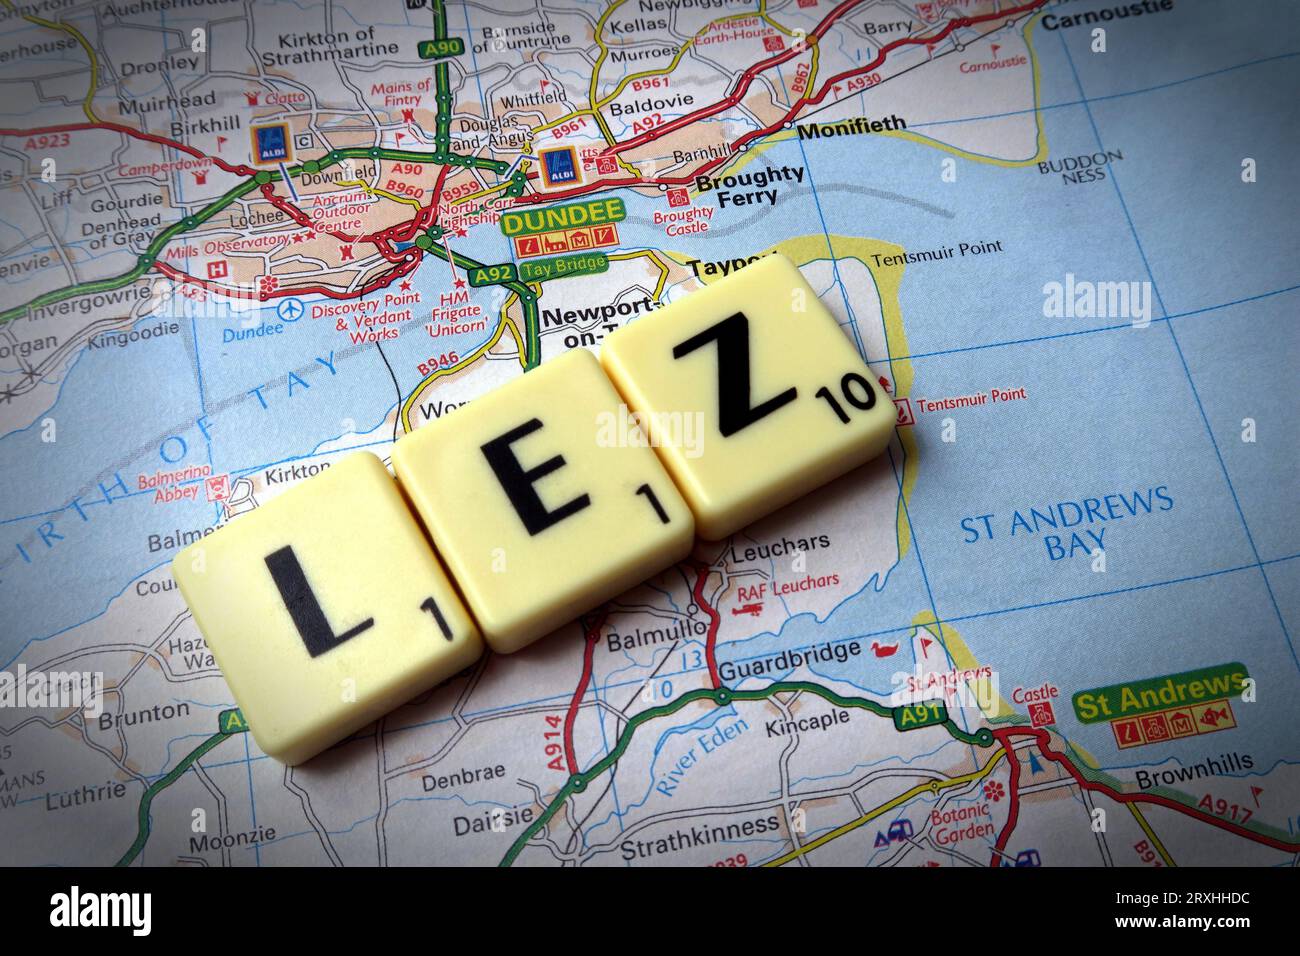 Dundee LEZ Low Emission Zone - in words, Scrabble letters on a map - DD1 1DD Stock Photo